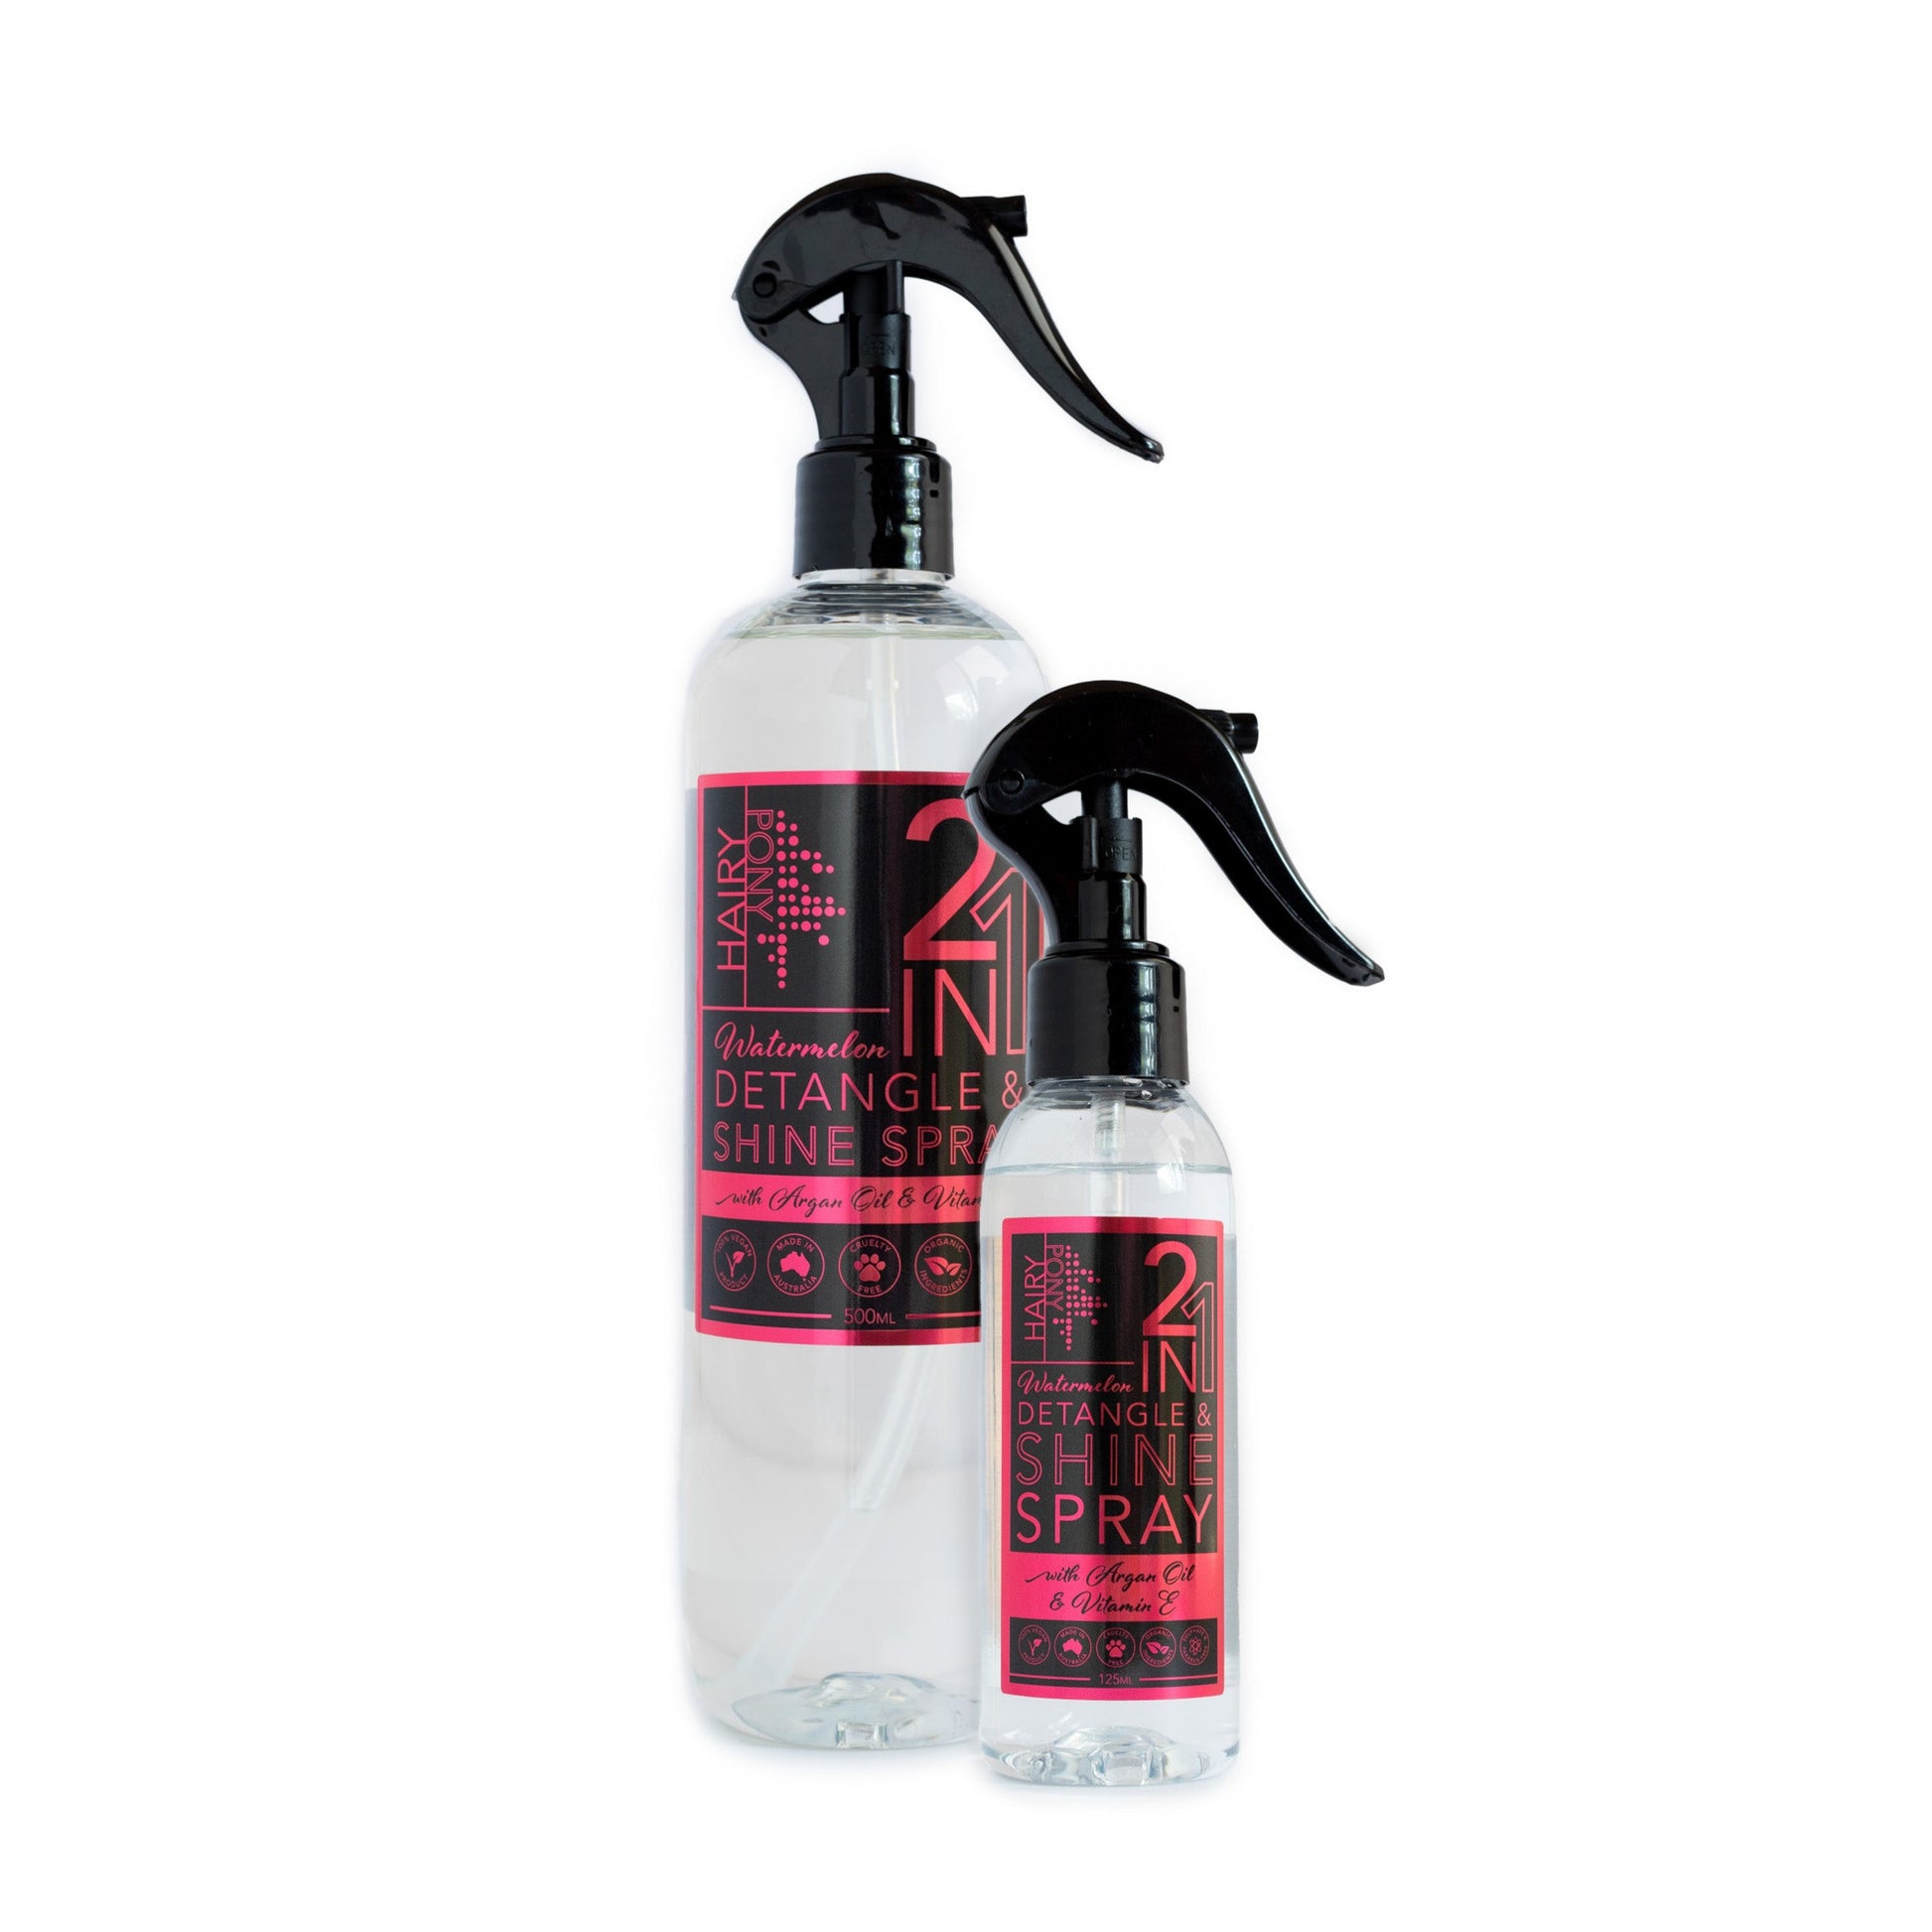 An image showing the two different packaging sizes available for the 2 In 1 Detangle & Shine Watermelon scented horse detangler spray. A 500ml bottle with spray nozzle and a 125ml bottle with spray nozzle.